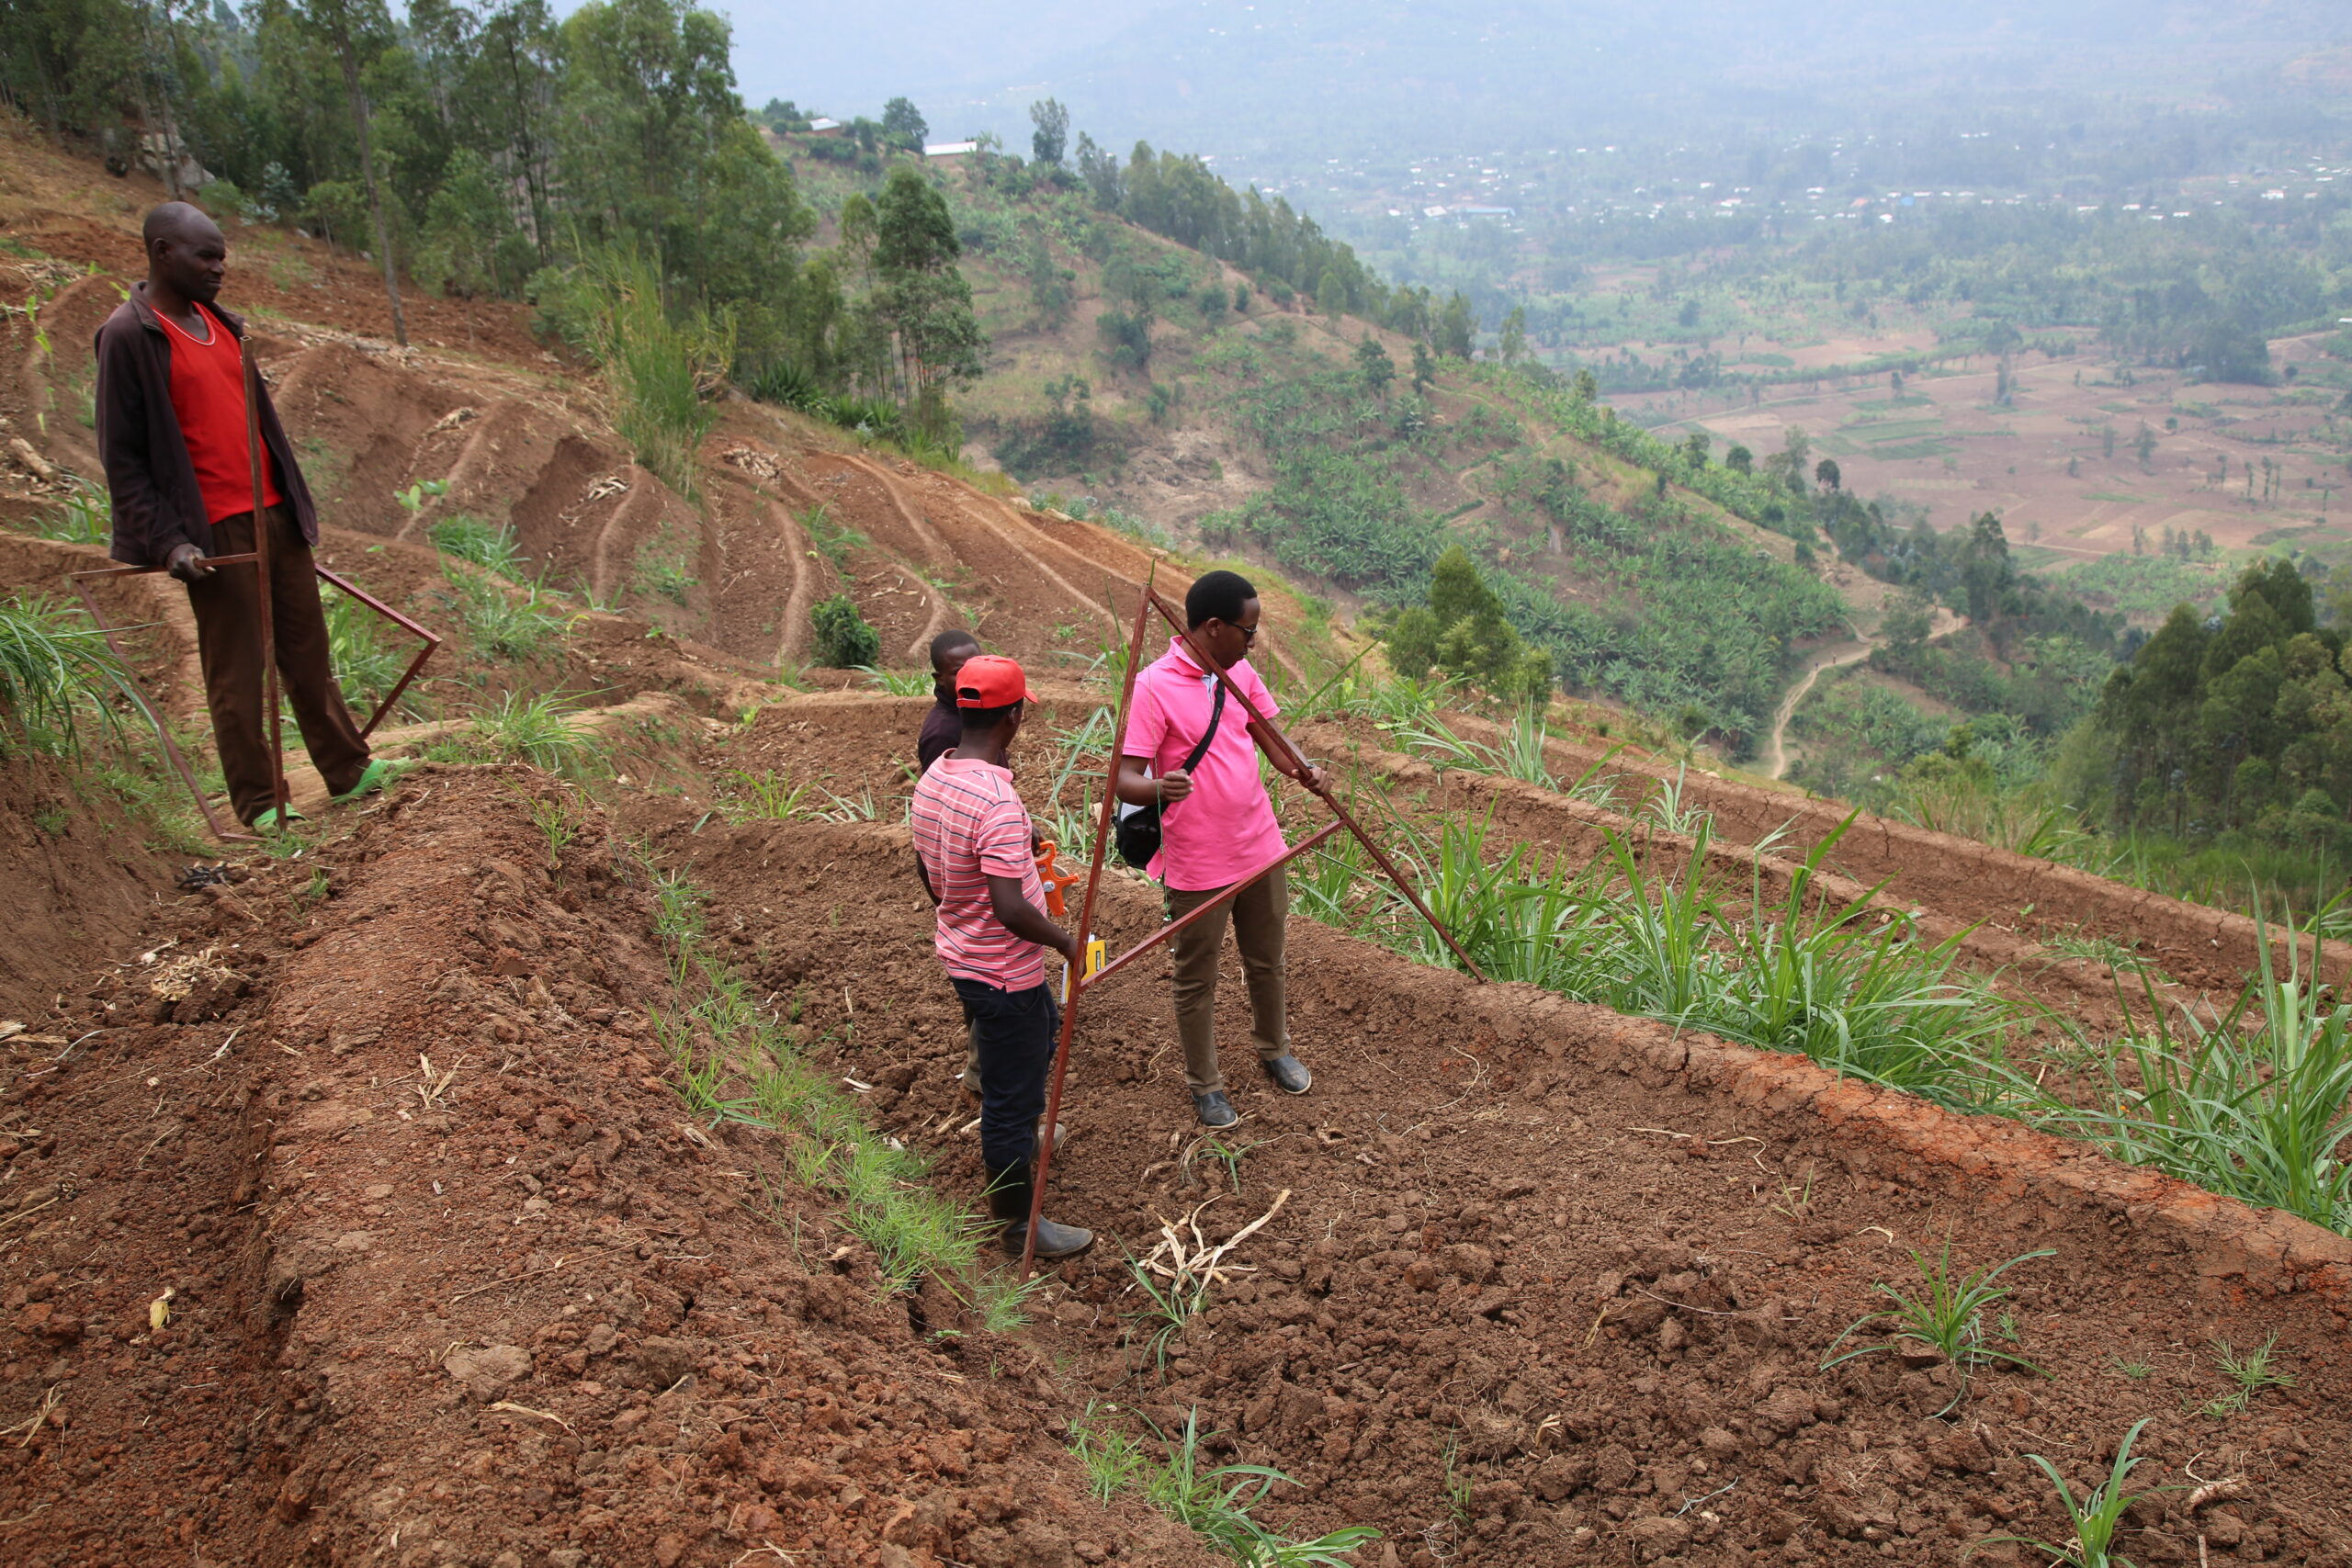 A landscape photograph taken on a hillside in Rwanda. There are four people in the foreground of the image, who are surveying the land. The ground is mostly soil with a few shrubs of grass growing. There are trees in the background.